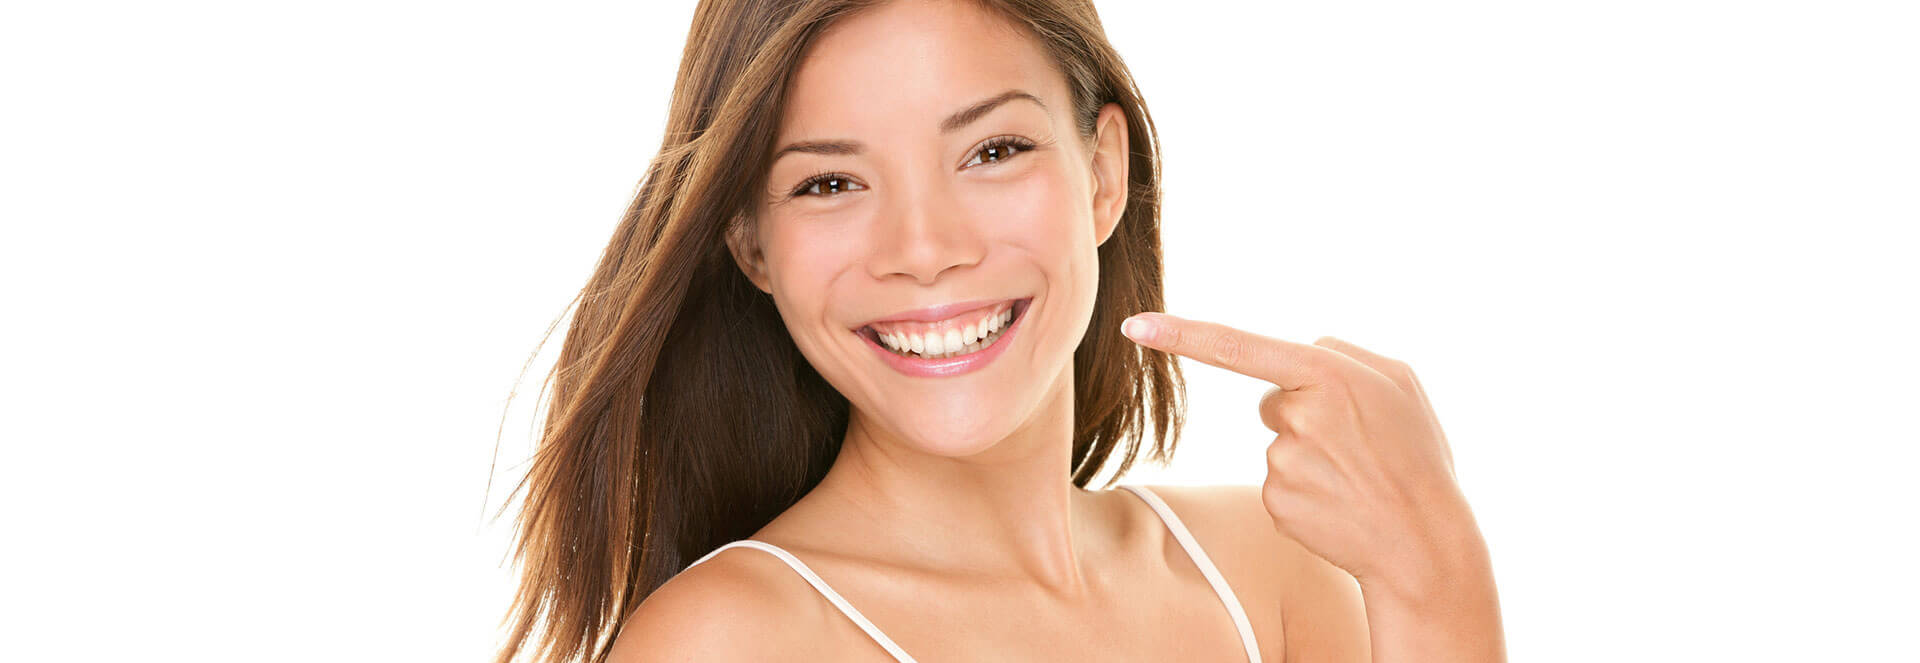 Happy young woman smiling pointing at her tooth colored fillings